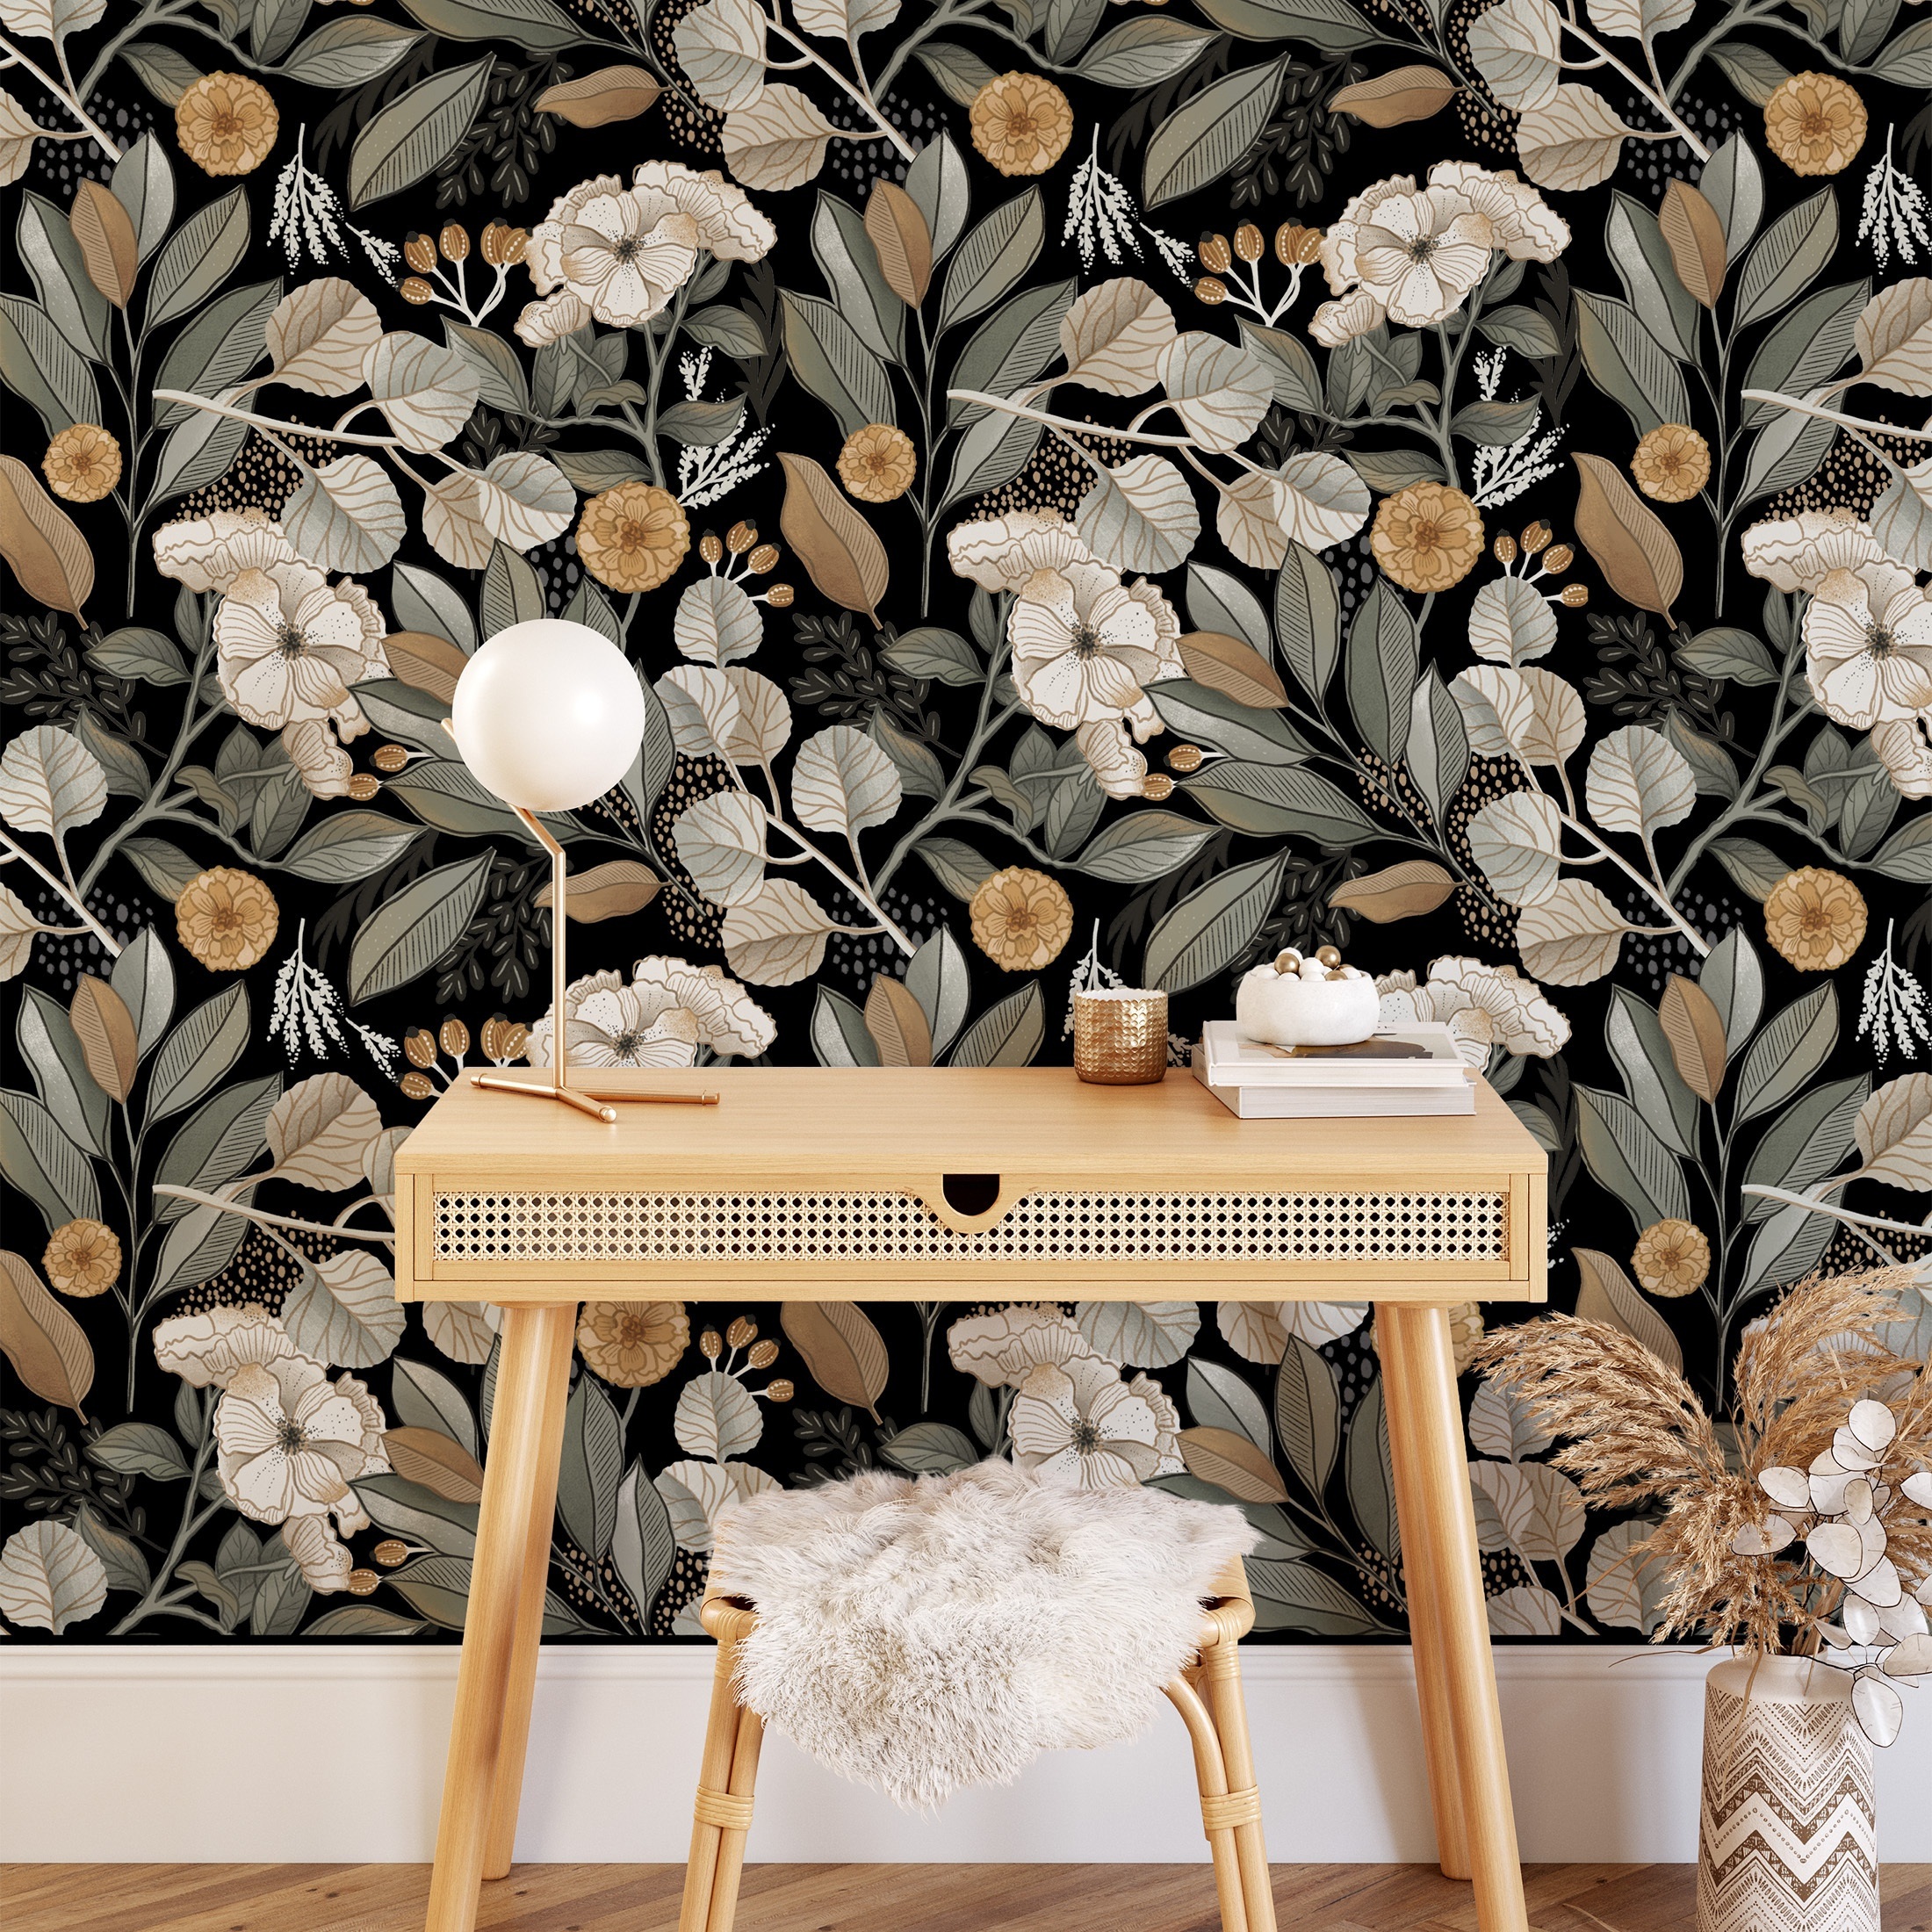 

1 Roll Retro Style Floral Plant Wallpaper, Waterproof Self-adhesive Removable Contact Paper For Living Room, Kitchen, Bedroom, Home And Dormitory Appliances Furniture Decoration, 17.7*78.7in